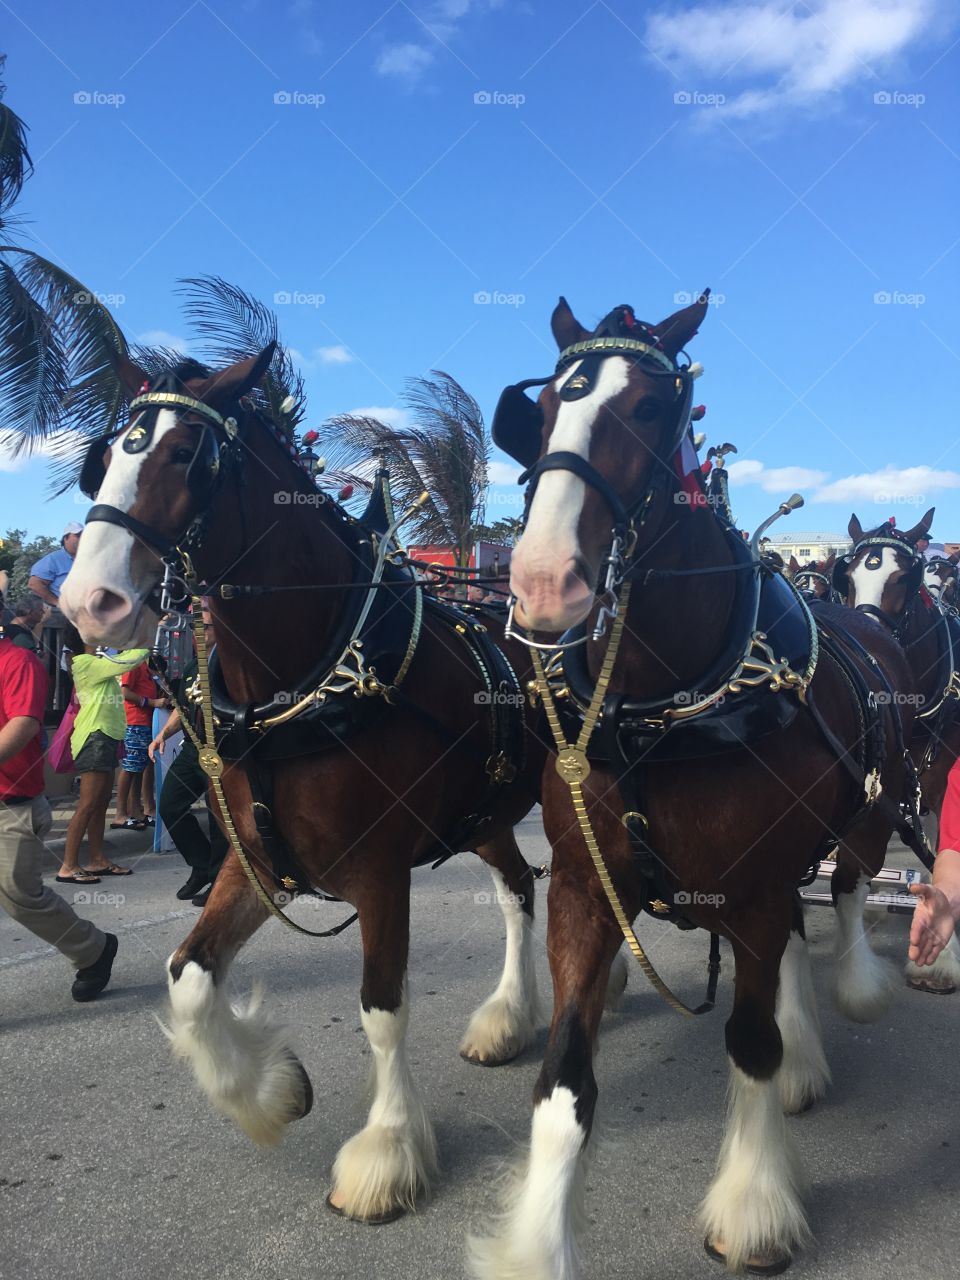 Clydesdale Budweiser horses trotting